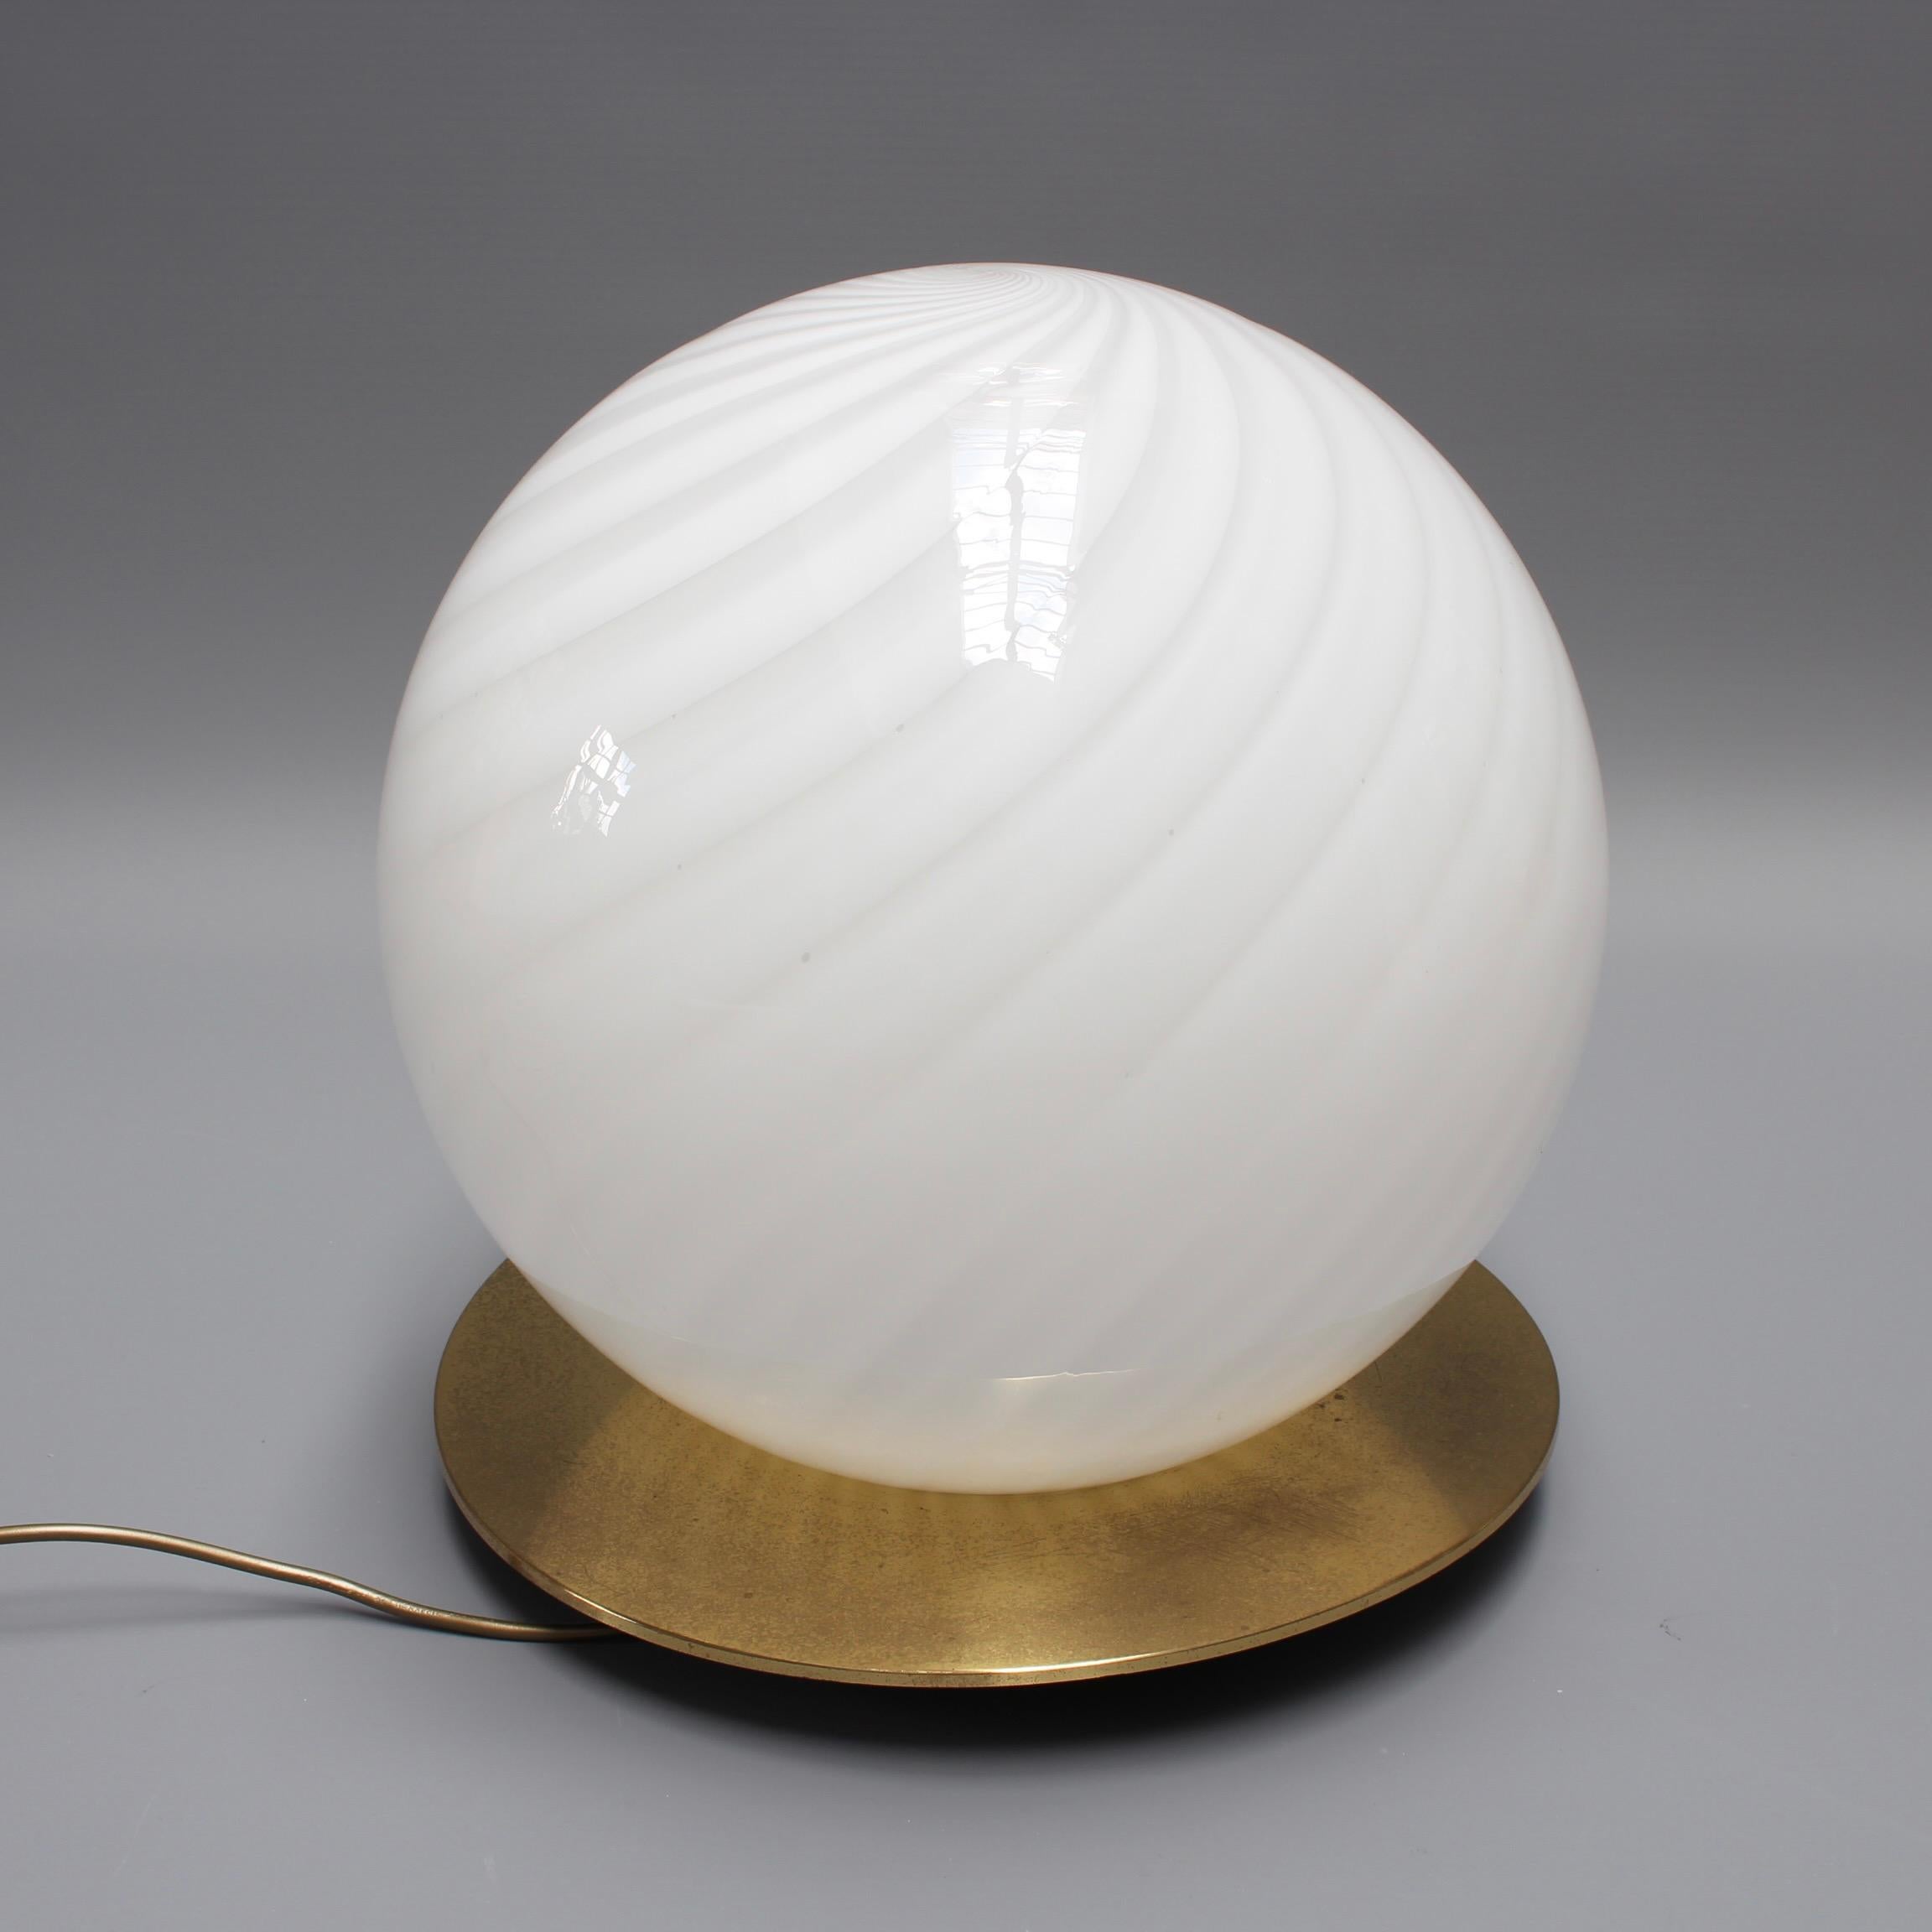 A large 1970s Italian Murano glass globe table lamp. Modernist and elegant, this blown Murano table lamp provides a source of lighting which is both utilitarian and decorative. The swirling longitudinal lines both capture and amplify the light's